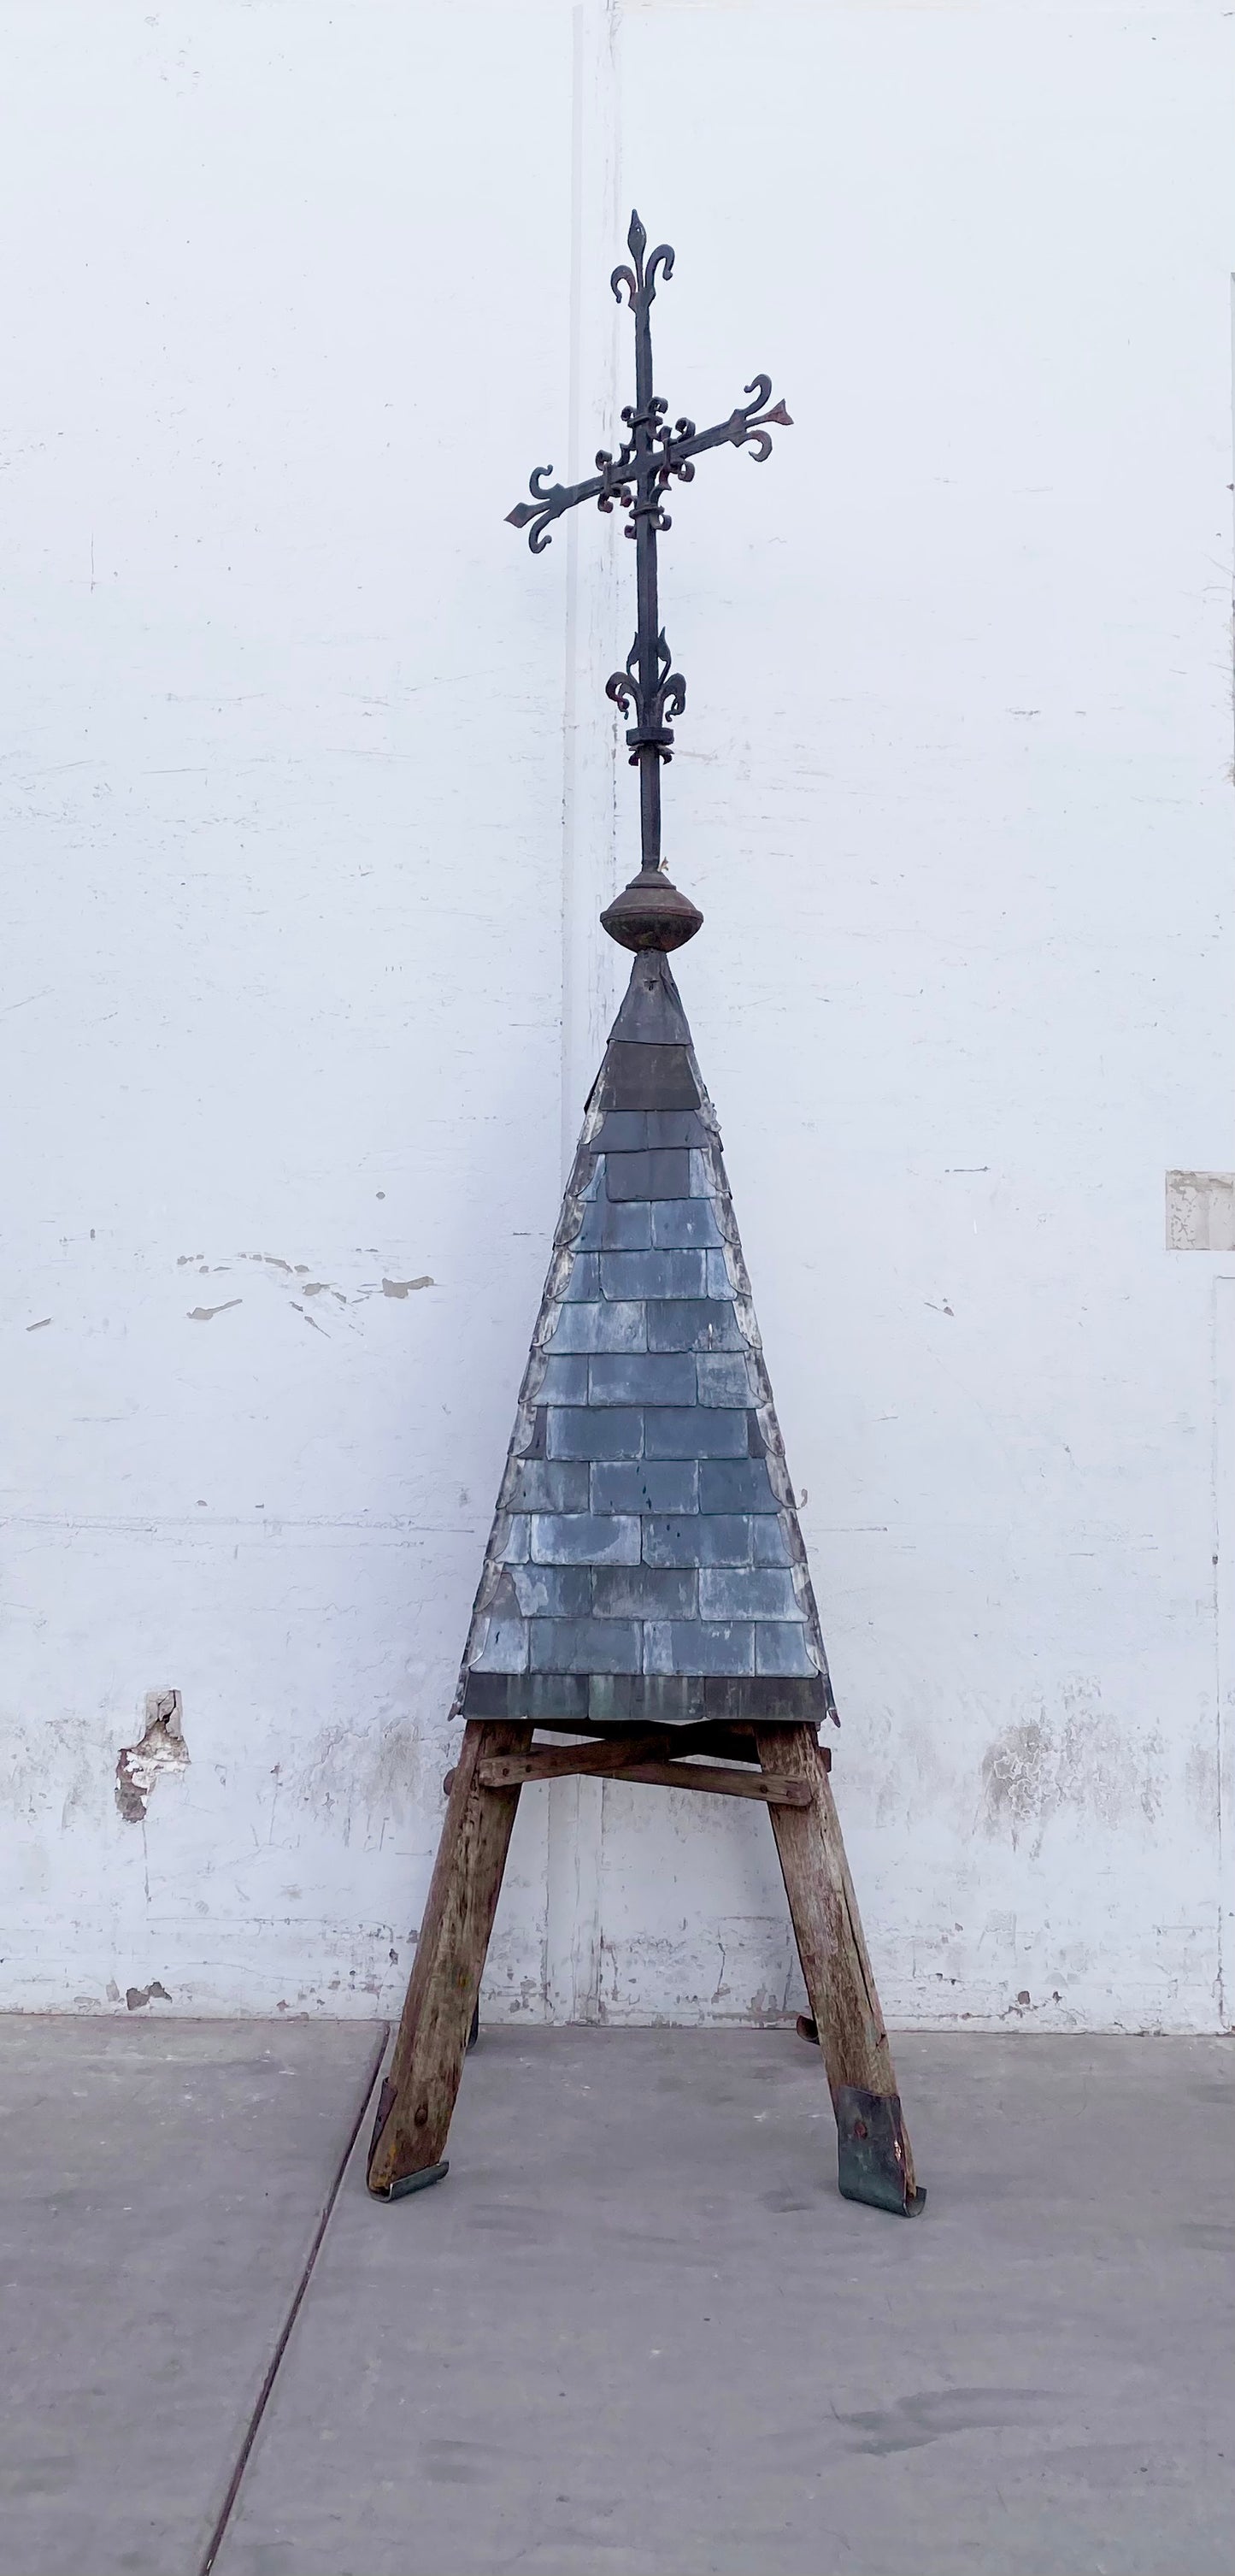 Architectural Spire with Finial